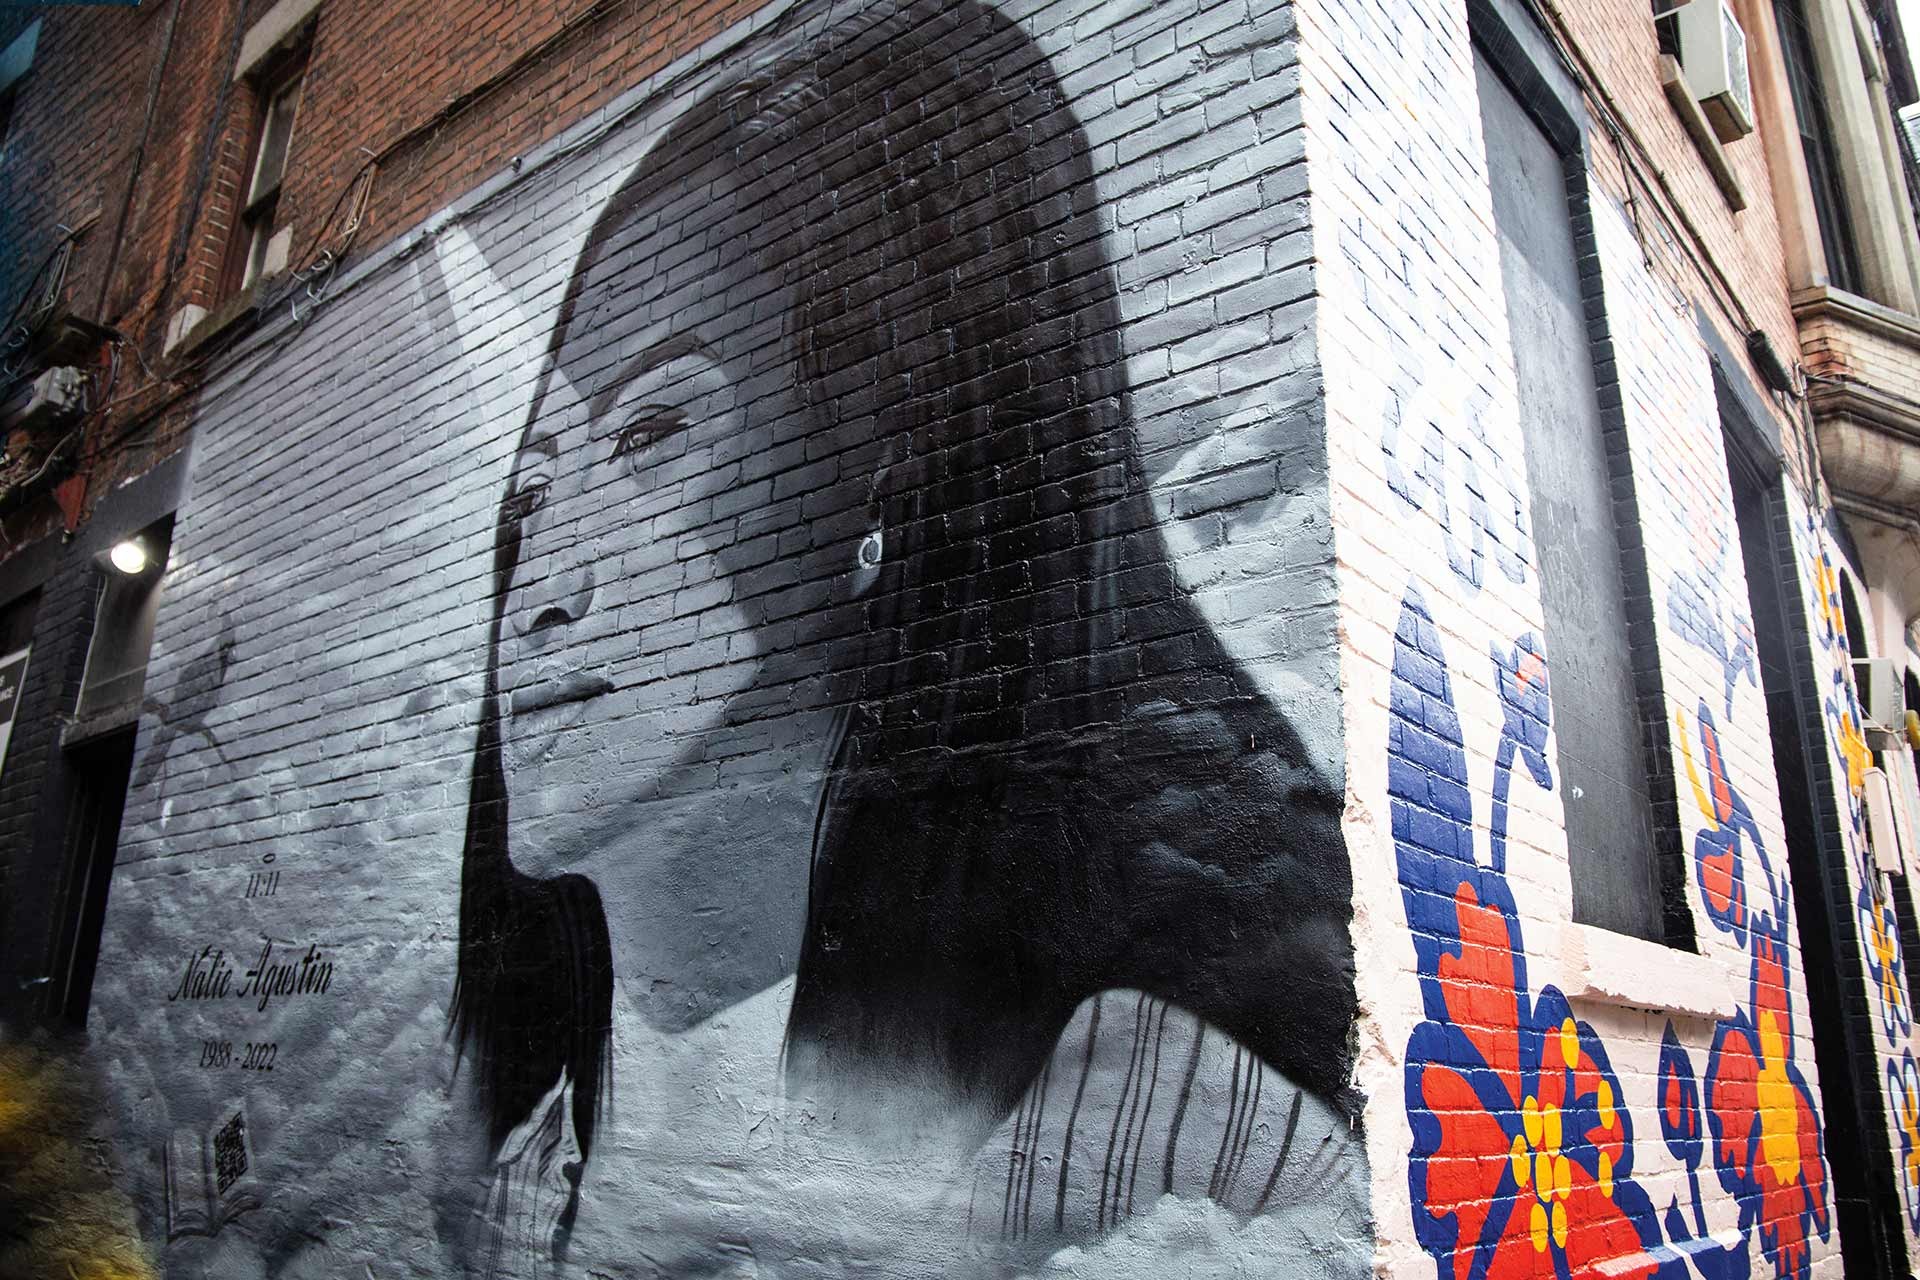 A painting of a young woman with long dark hair on a brick wall